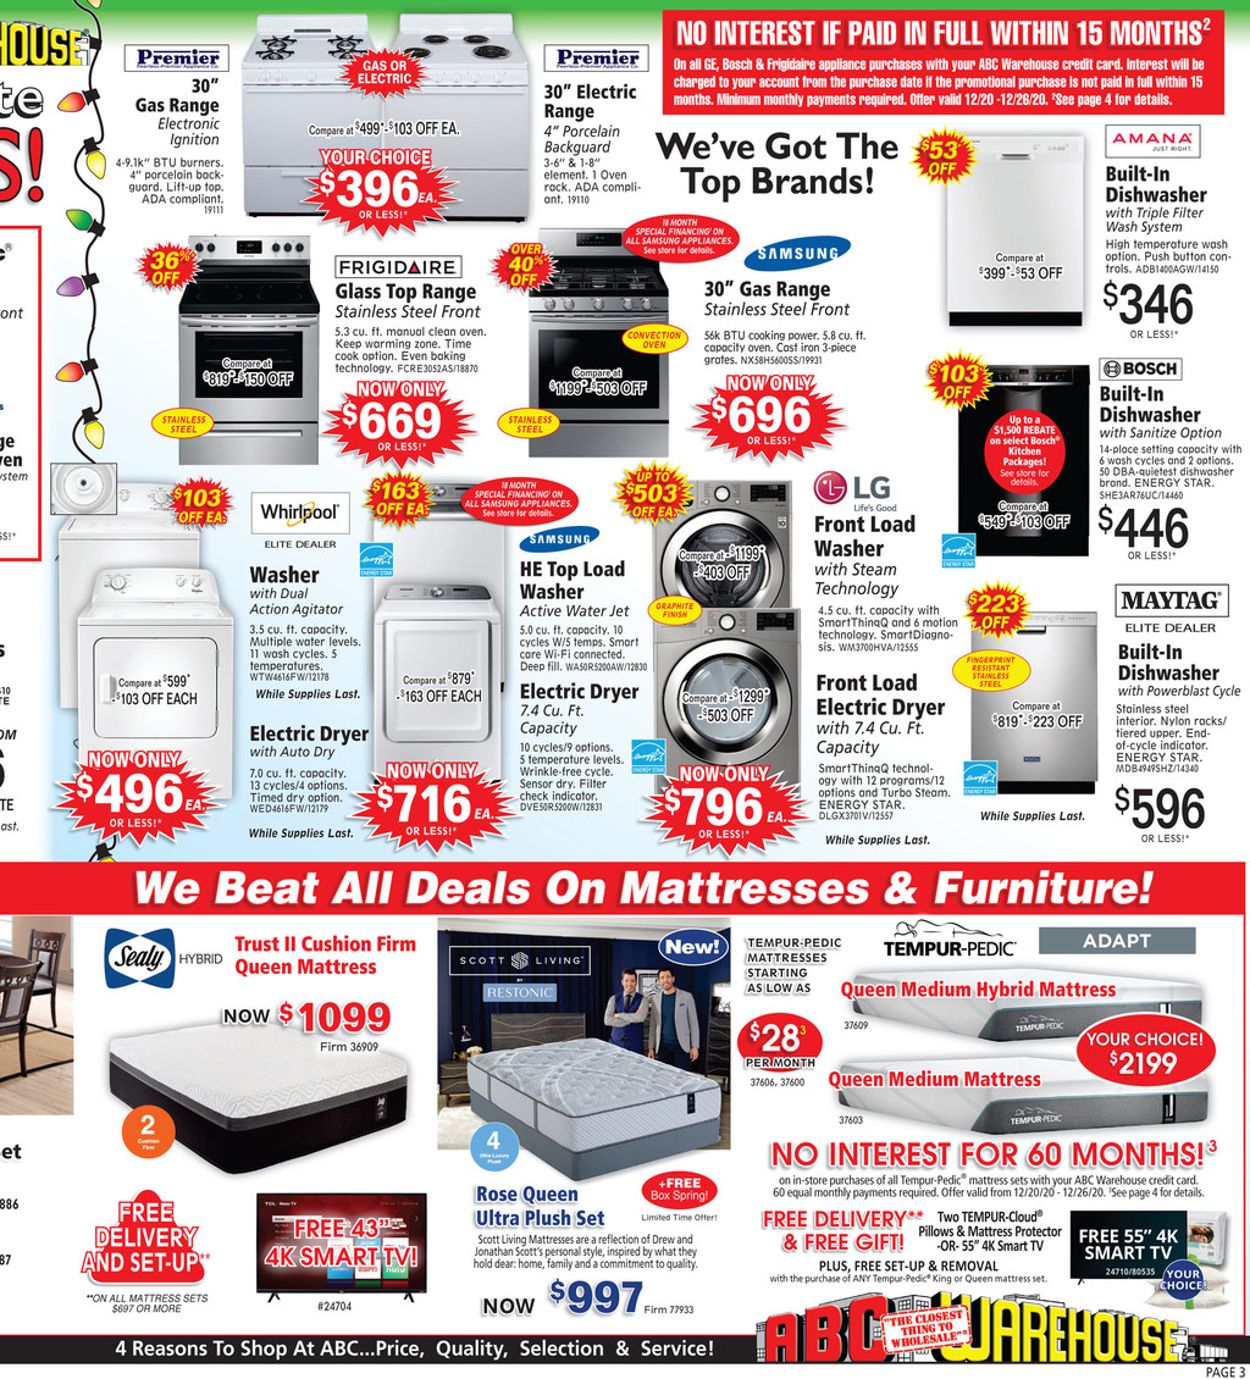 ABC Warehouse Last Minute Sale 2020 Weekly Ad Circular - valid 12/20-12/26/2020 (Page 3)